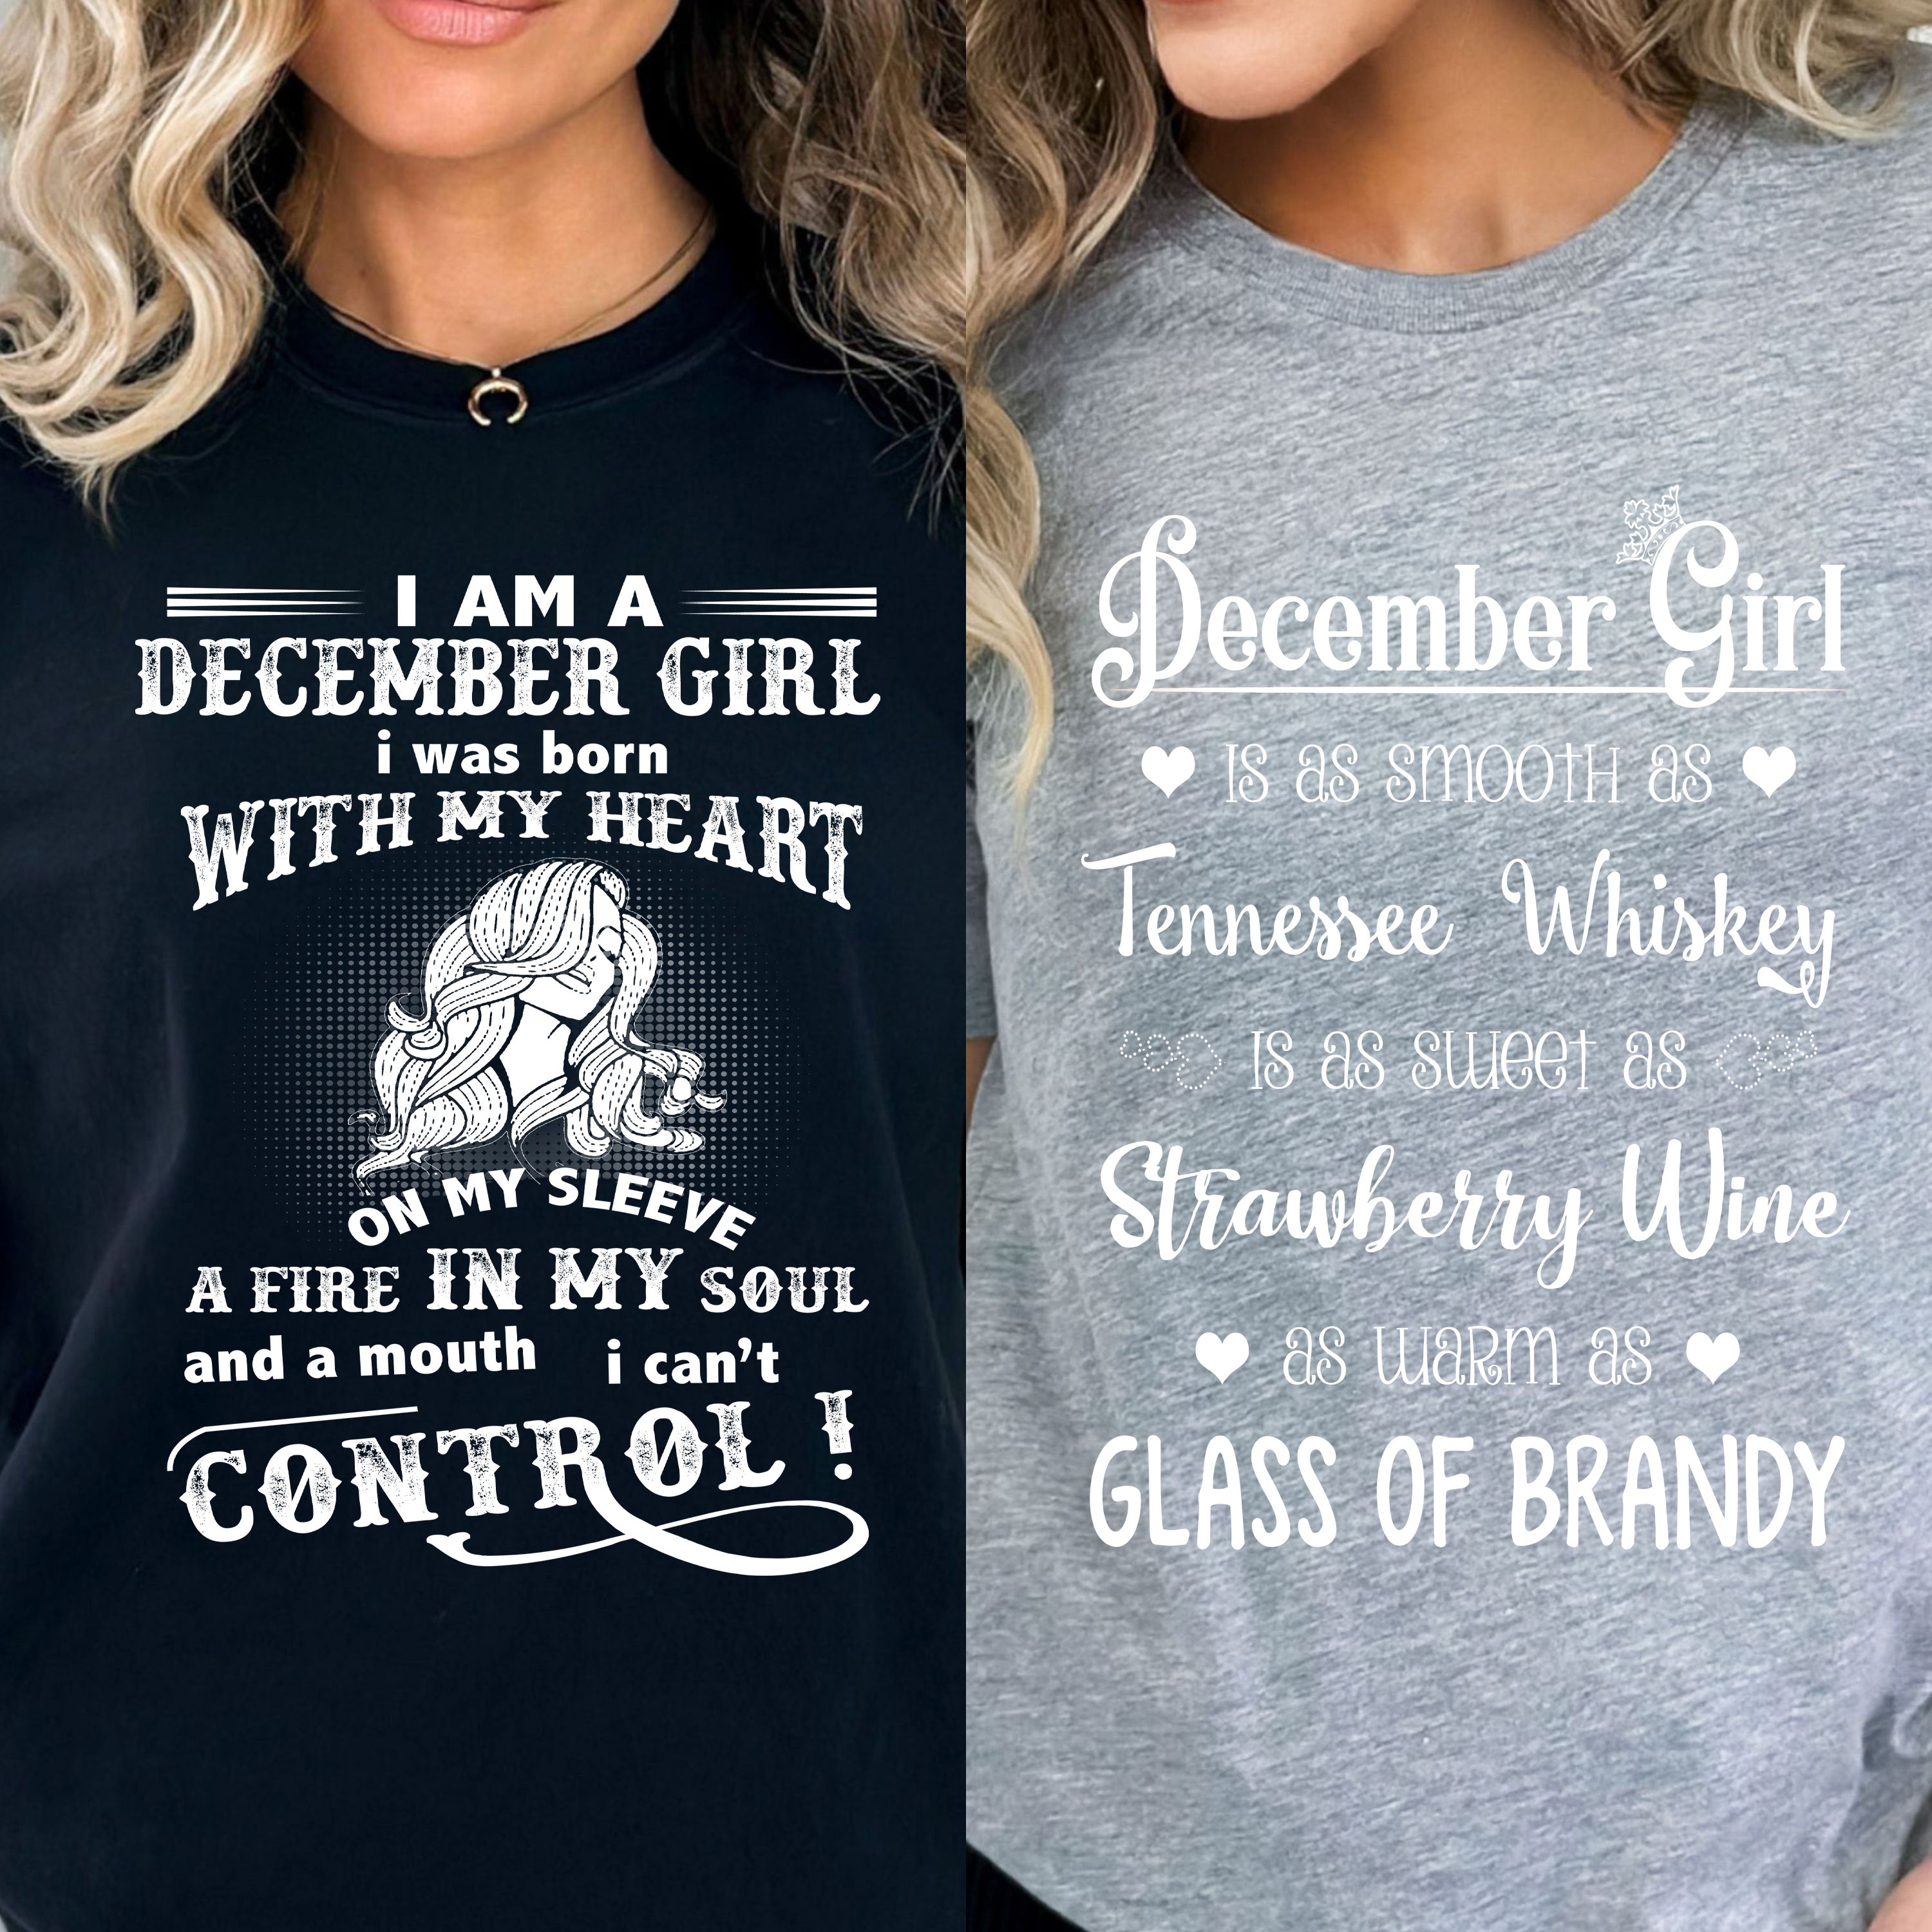 "December Whiskey + Control -Pack of 2".